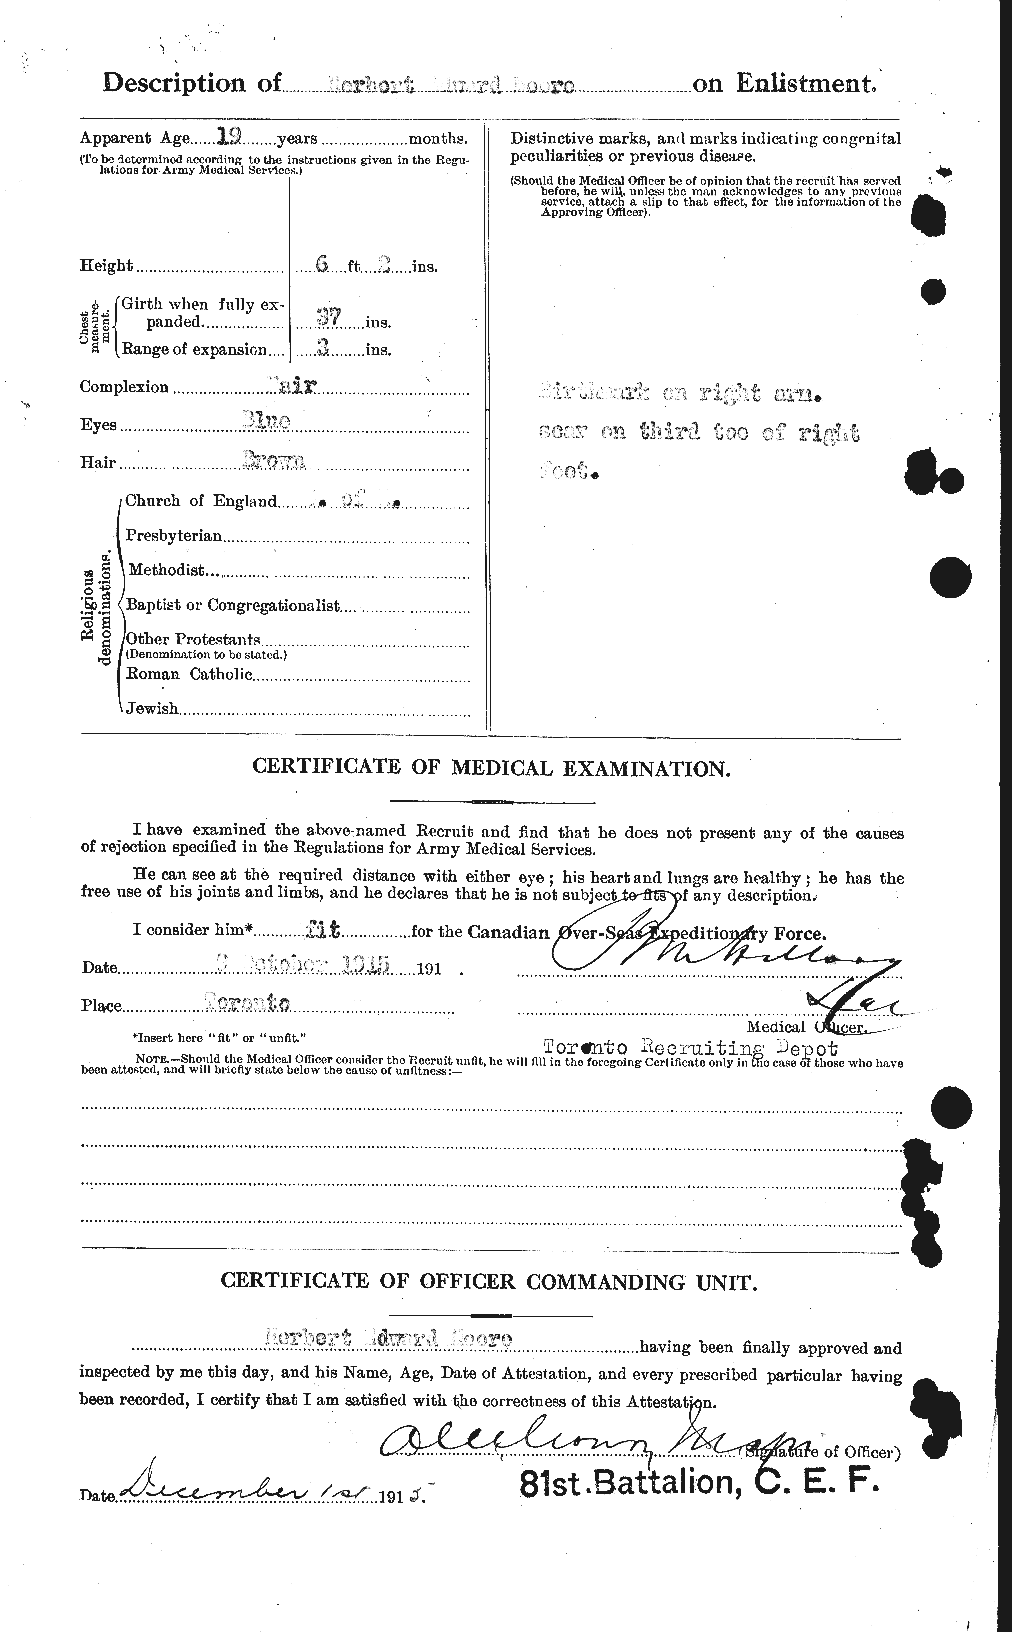 Personnel Records of the First World War - CEF 502115b